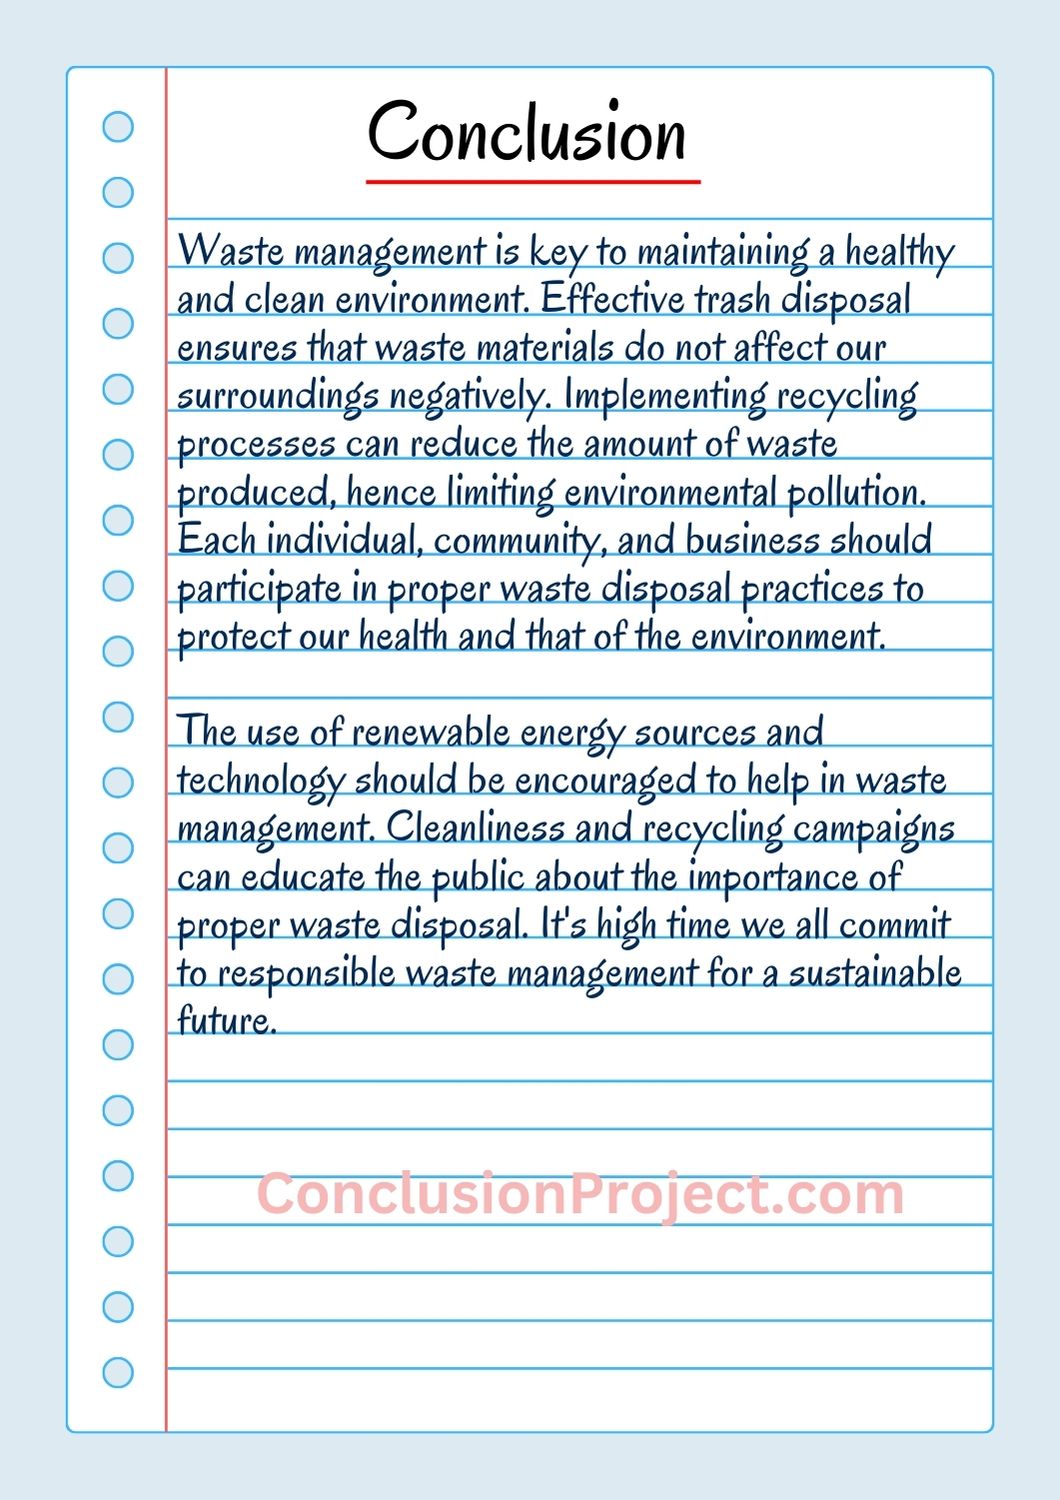 Conclusion of Waste Management